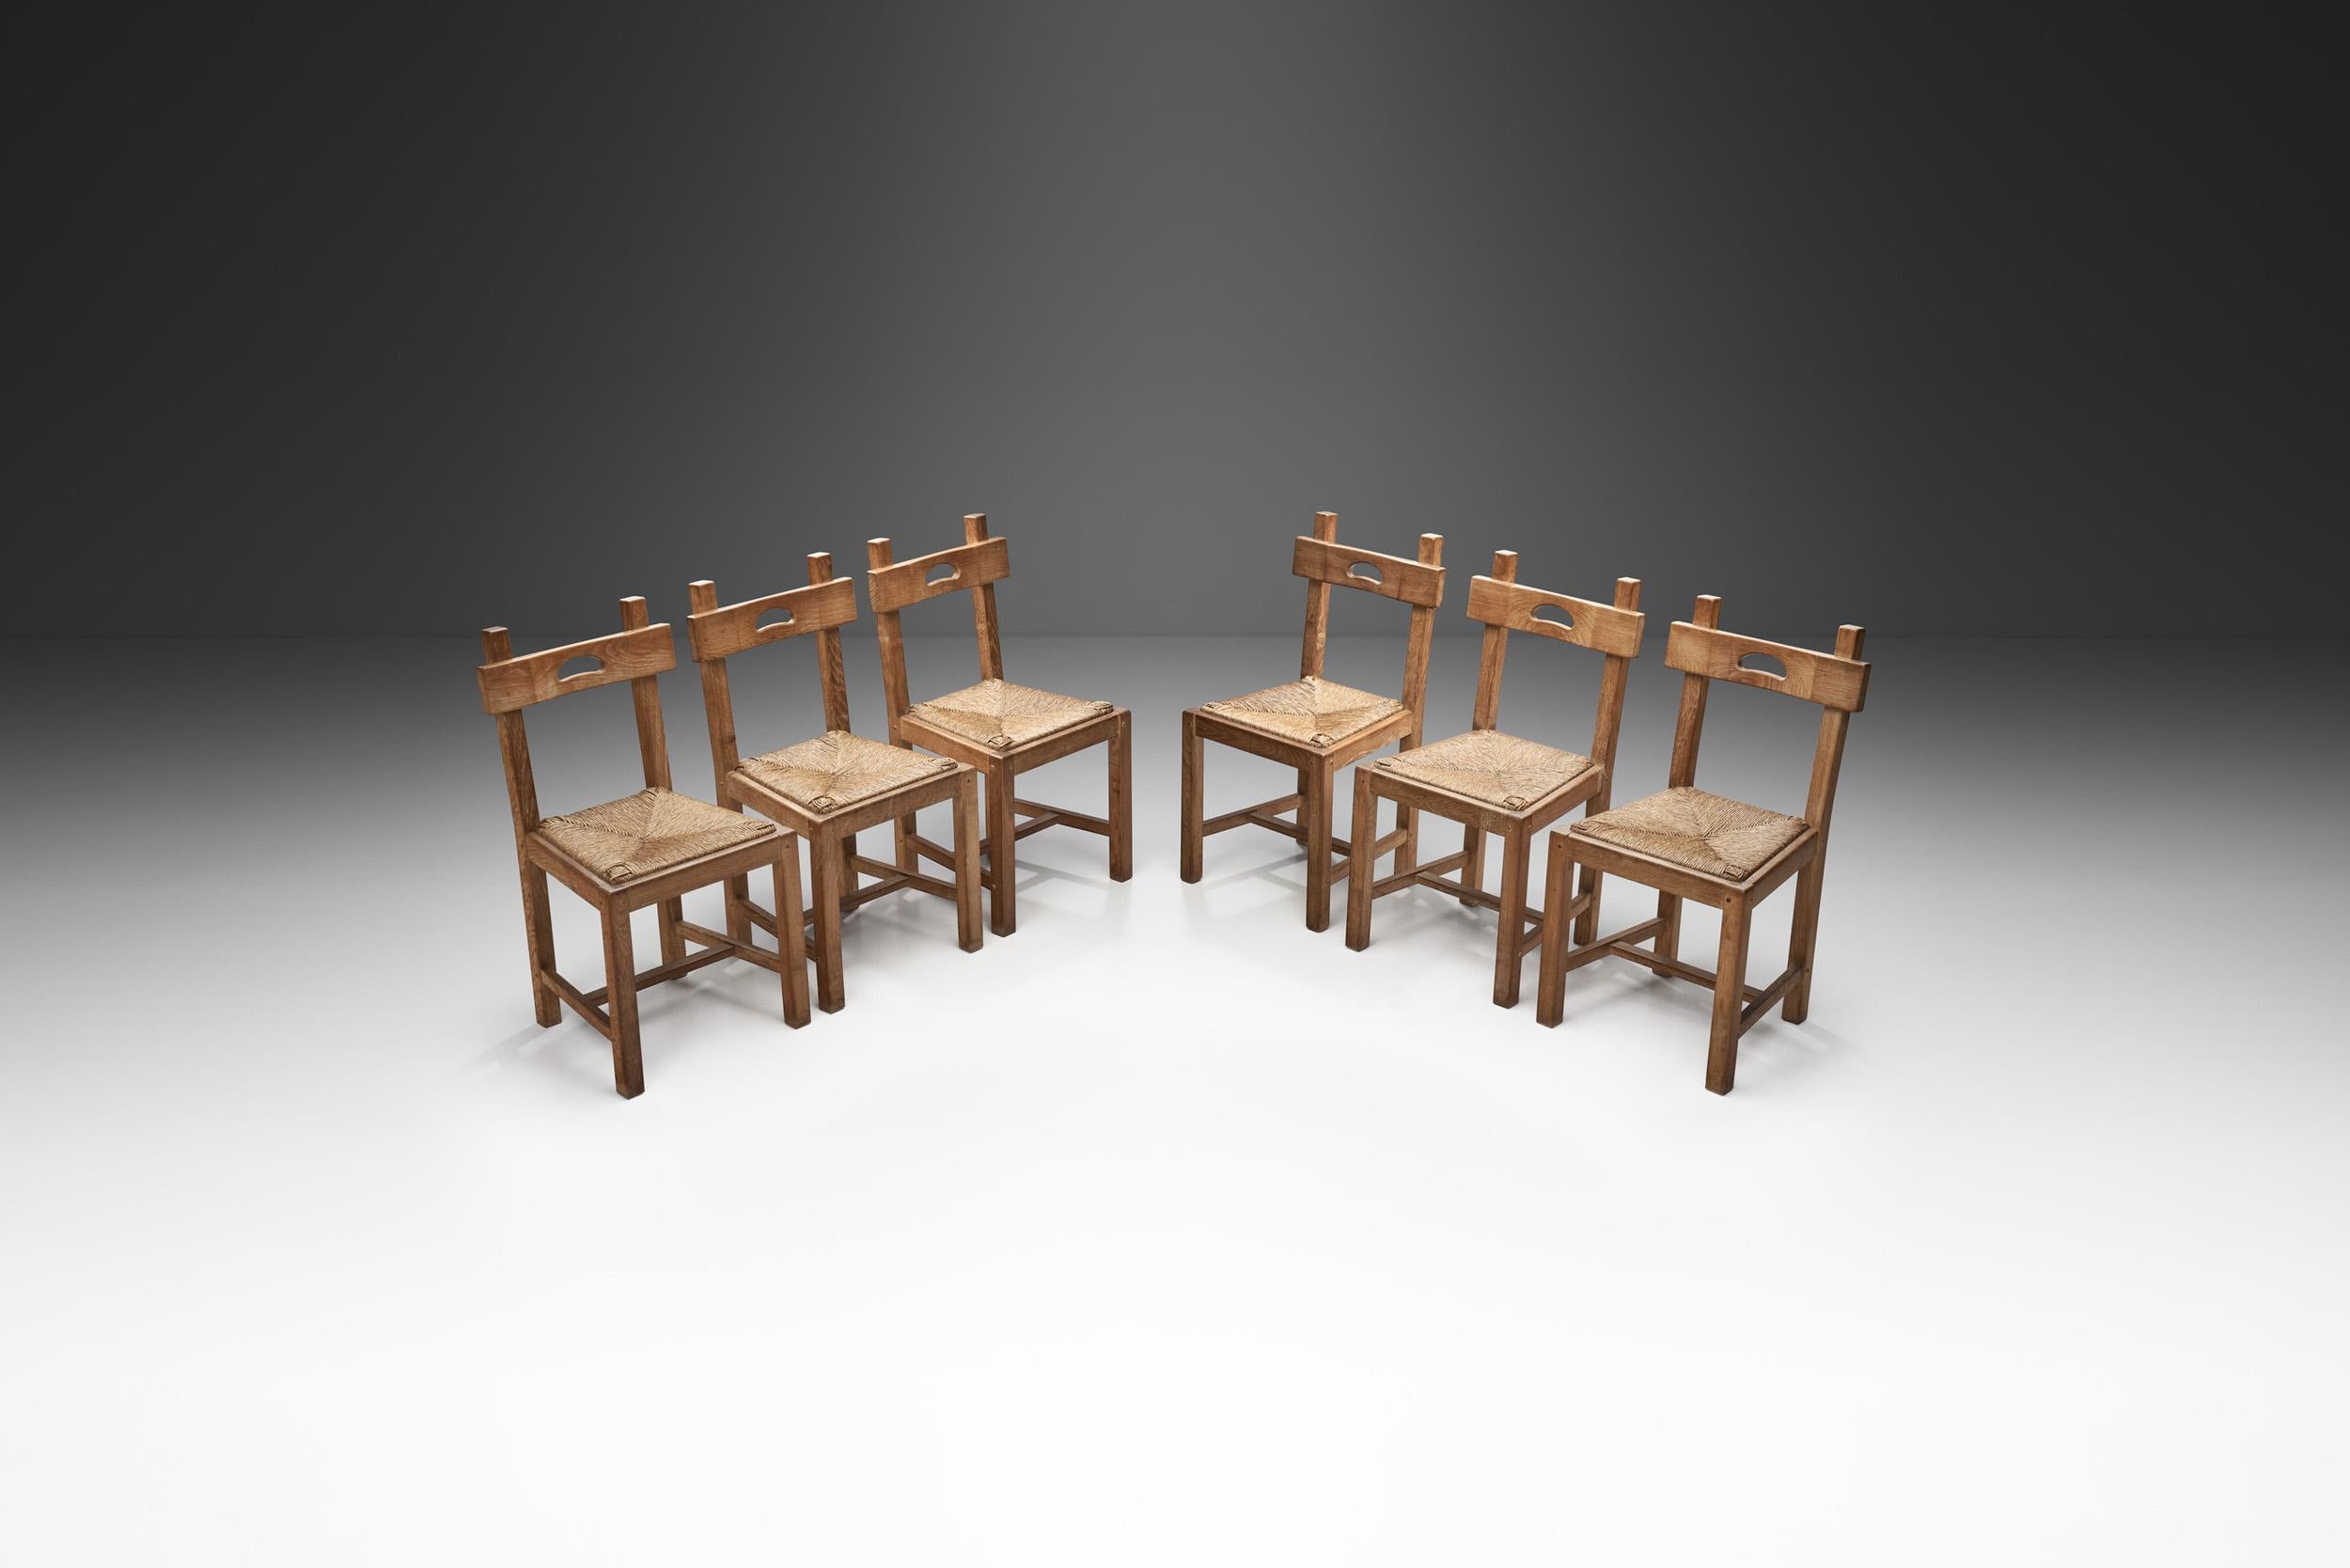 This mid-century dining chair set was born from a desire to create a design that was comfortable, organic and cosy in its simplicity. The design incorporates subtle, yet stunning decorative elements on a base that Scandinavians like to call “honest